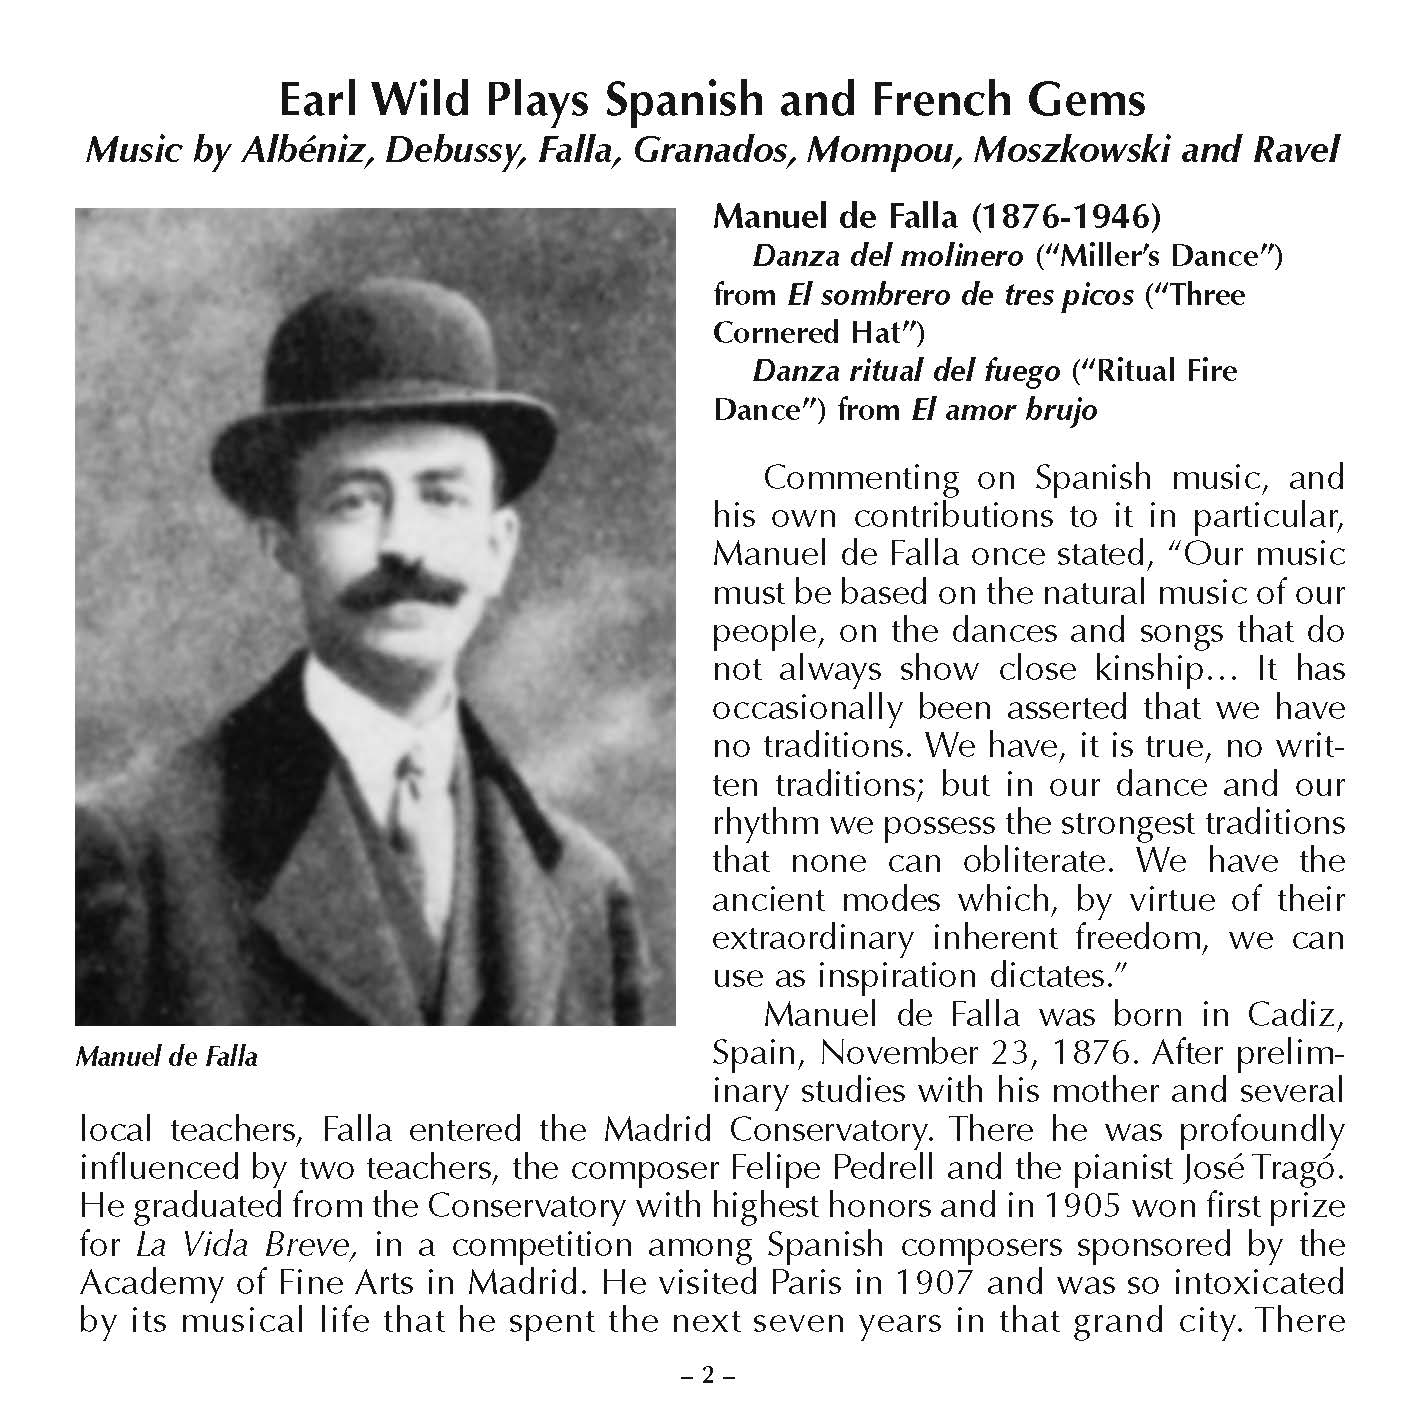 Earl Wild plays Spanish and French Gems